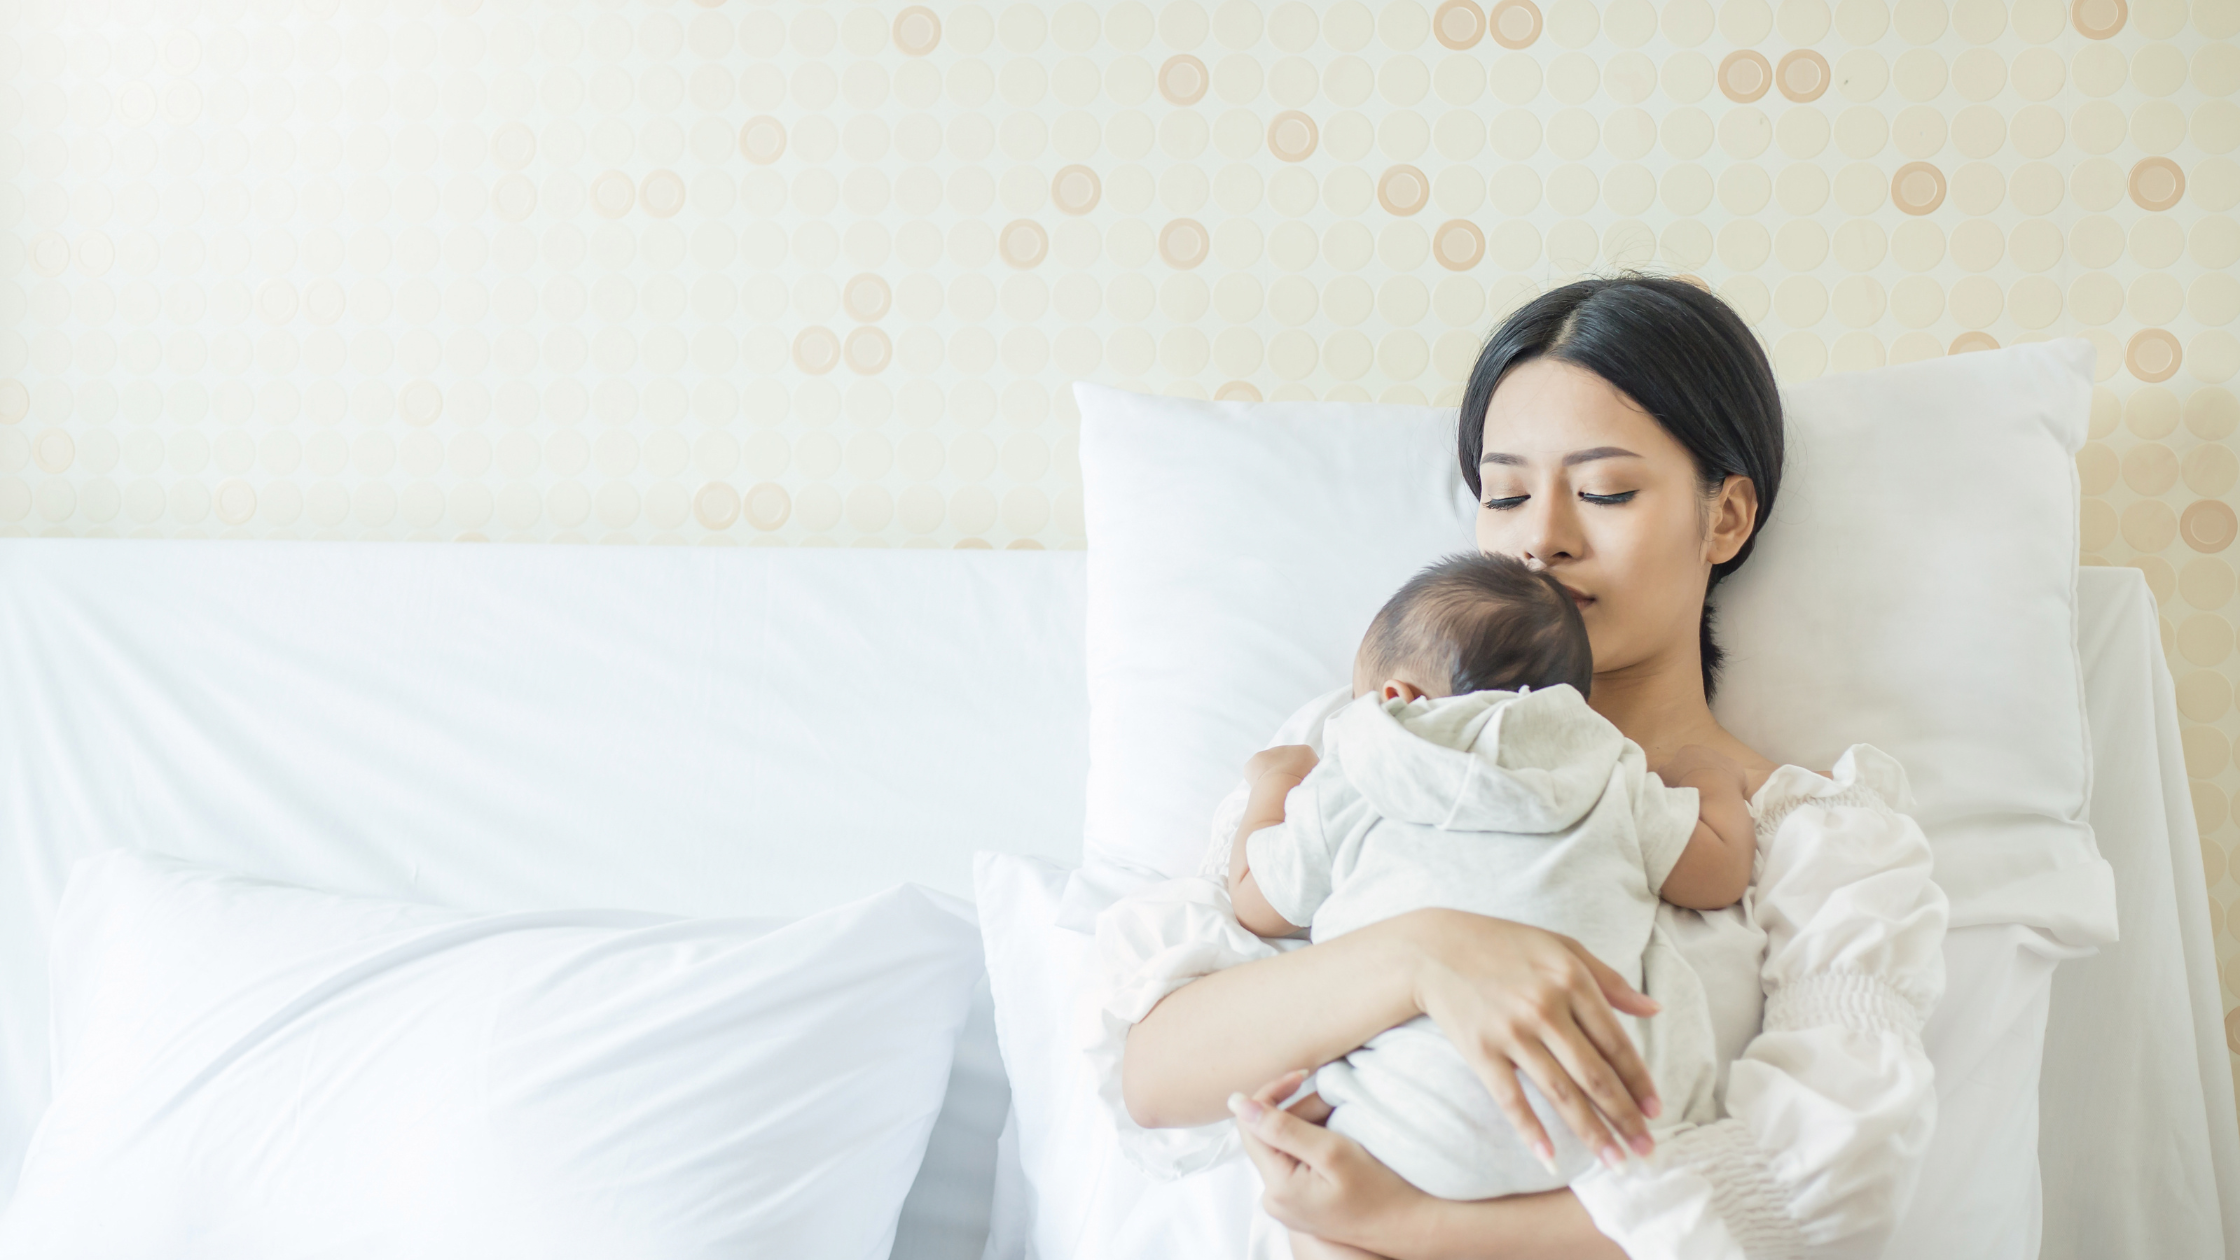 Breastfeeding as an Integration of Whole Health